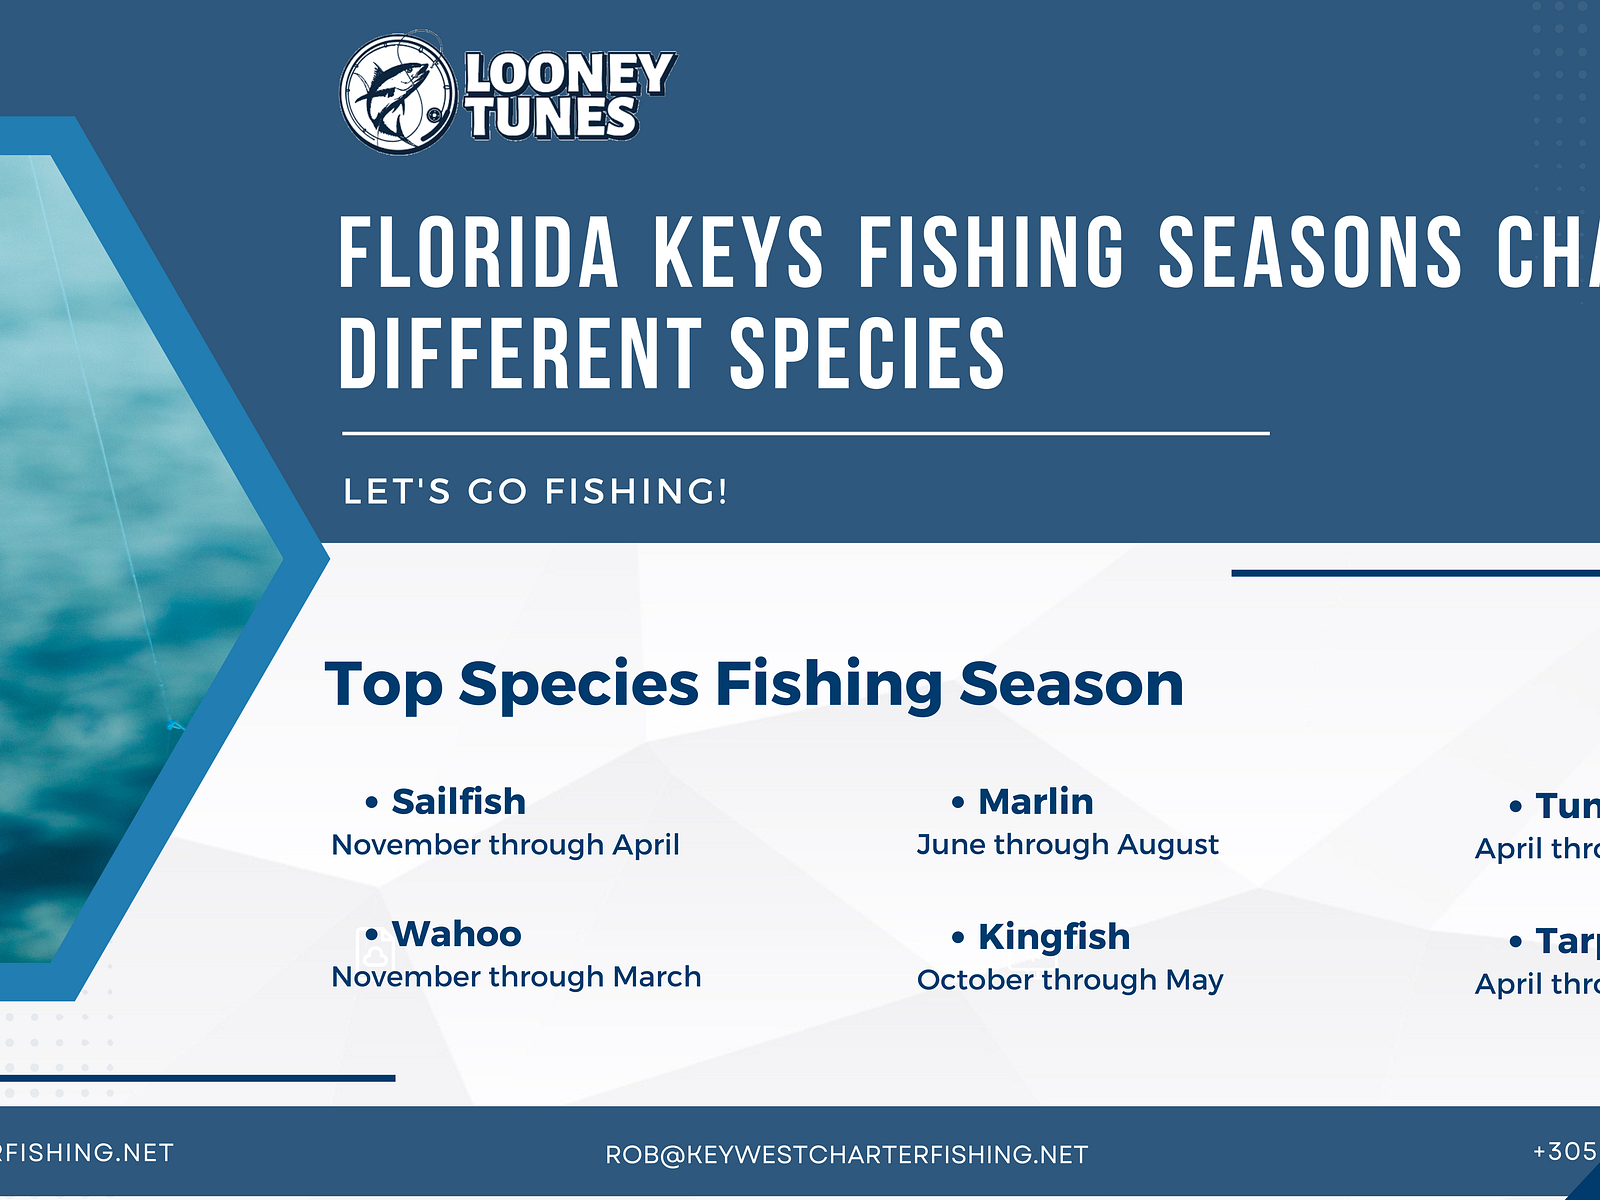 Florida Keys Fishing Seasons Chart for Different Species by Looney